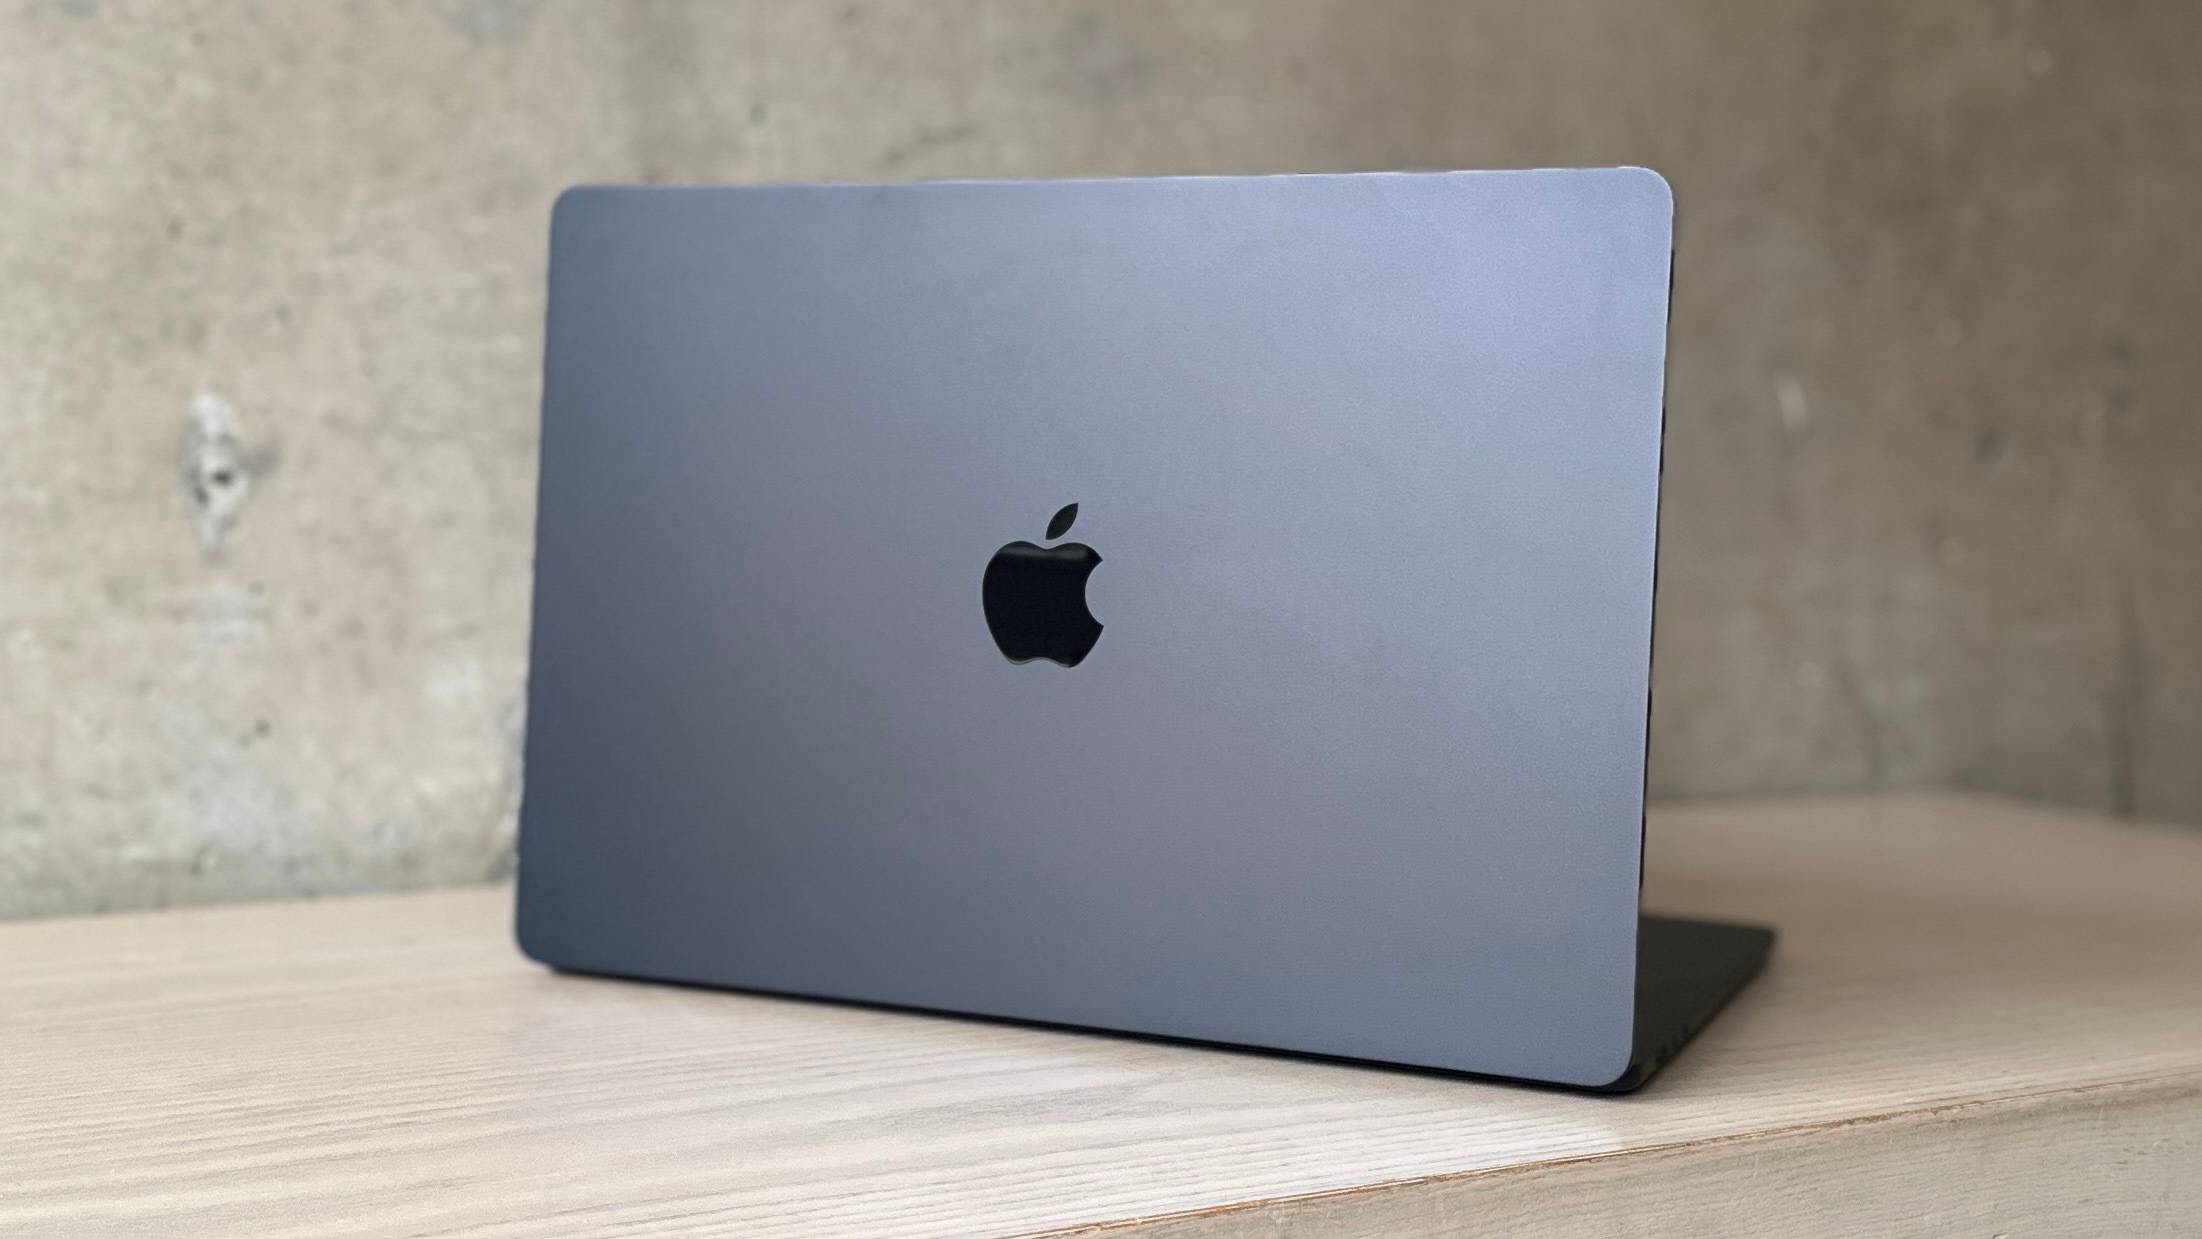 Apple's 15-inch MacBook Air is a big laptop I don't mind carrying